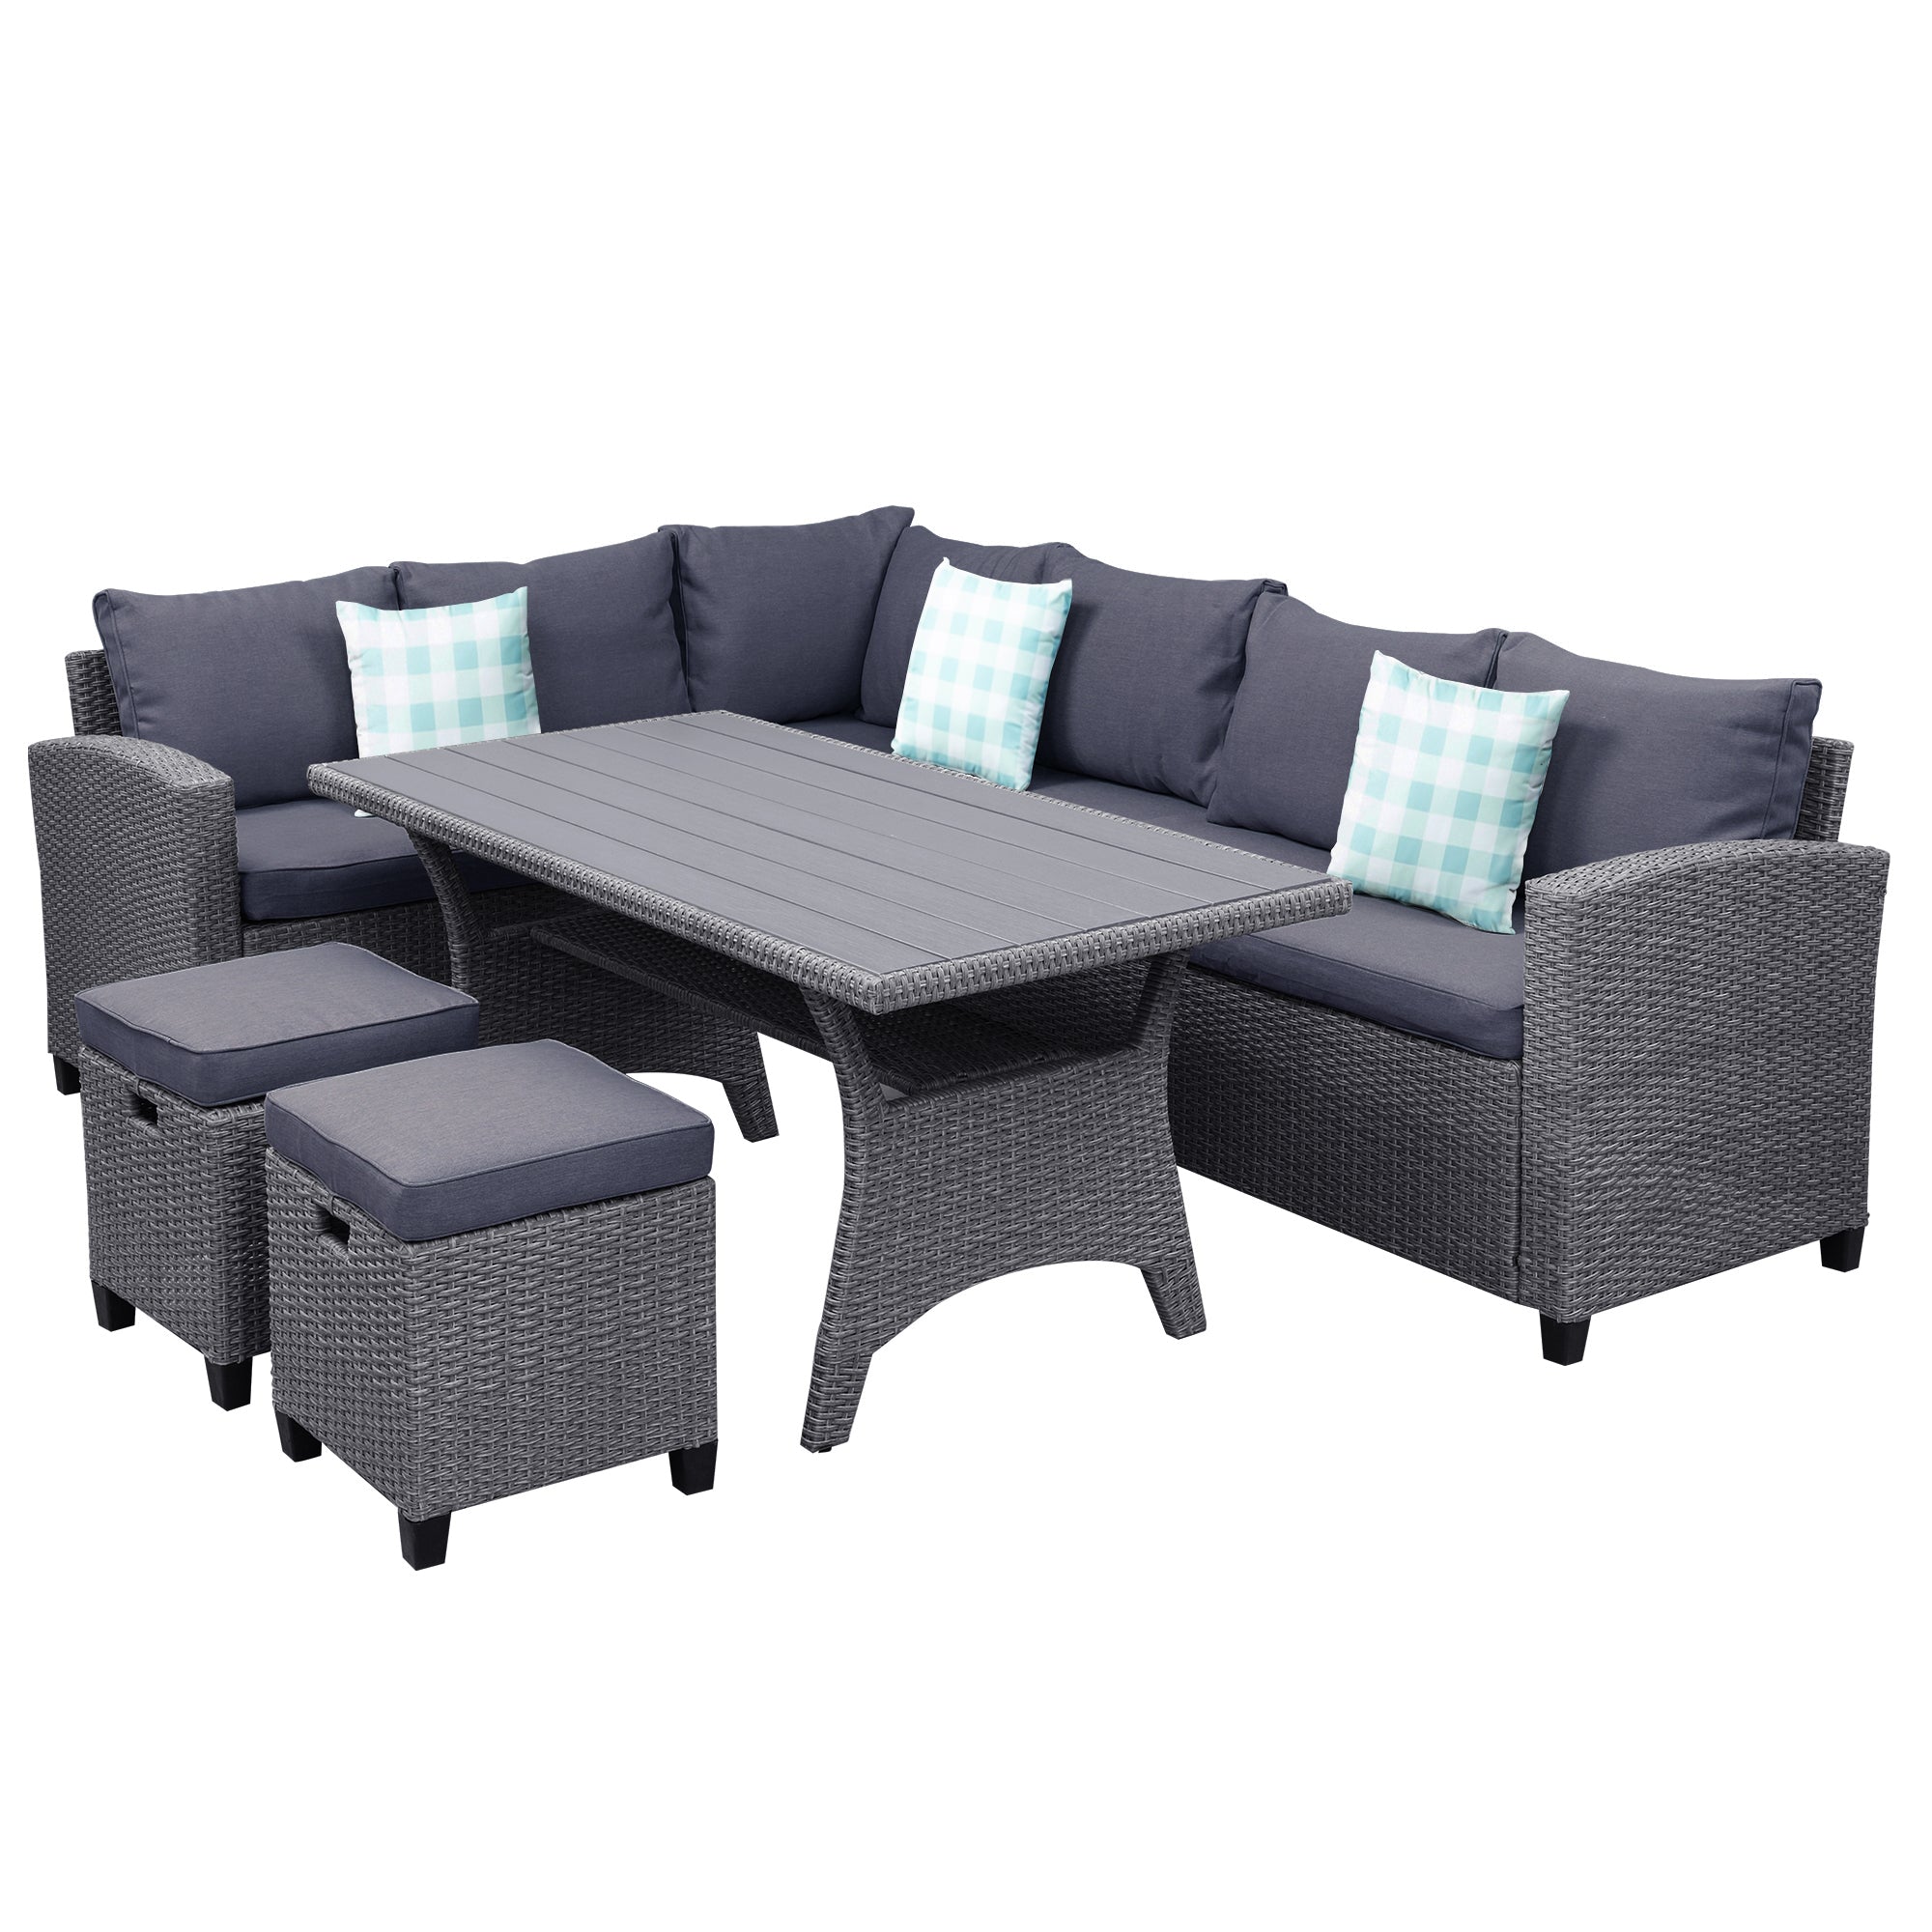 Patio Furniture Set, 5 Piece Outdoor Conversation Set, Dining Table Chair with Ottoman and Throw Pillows